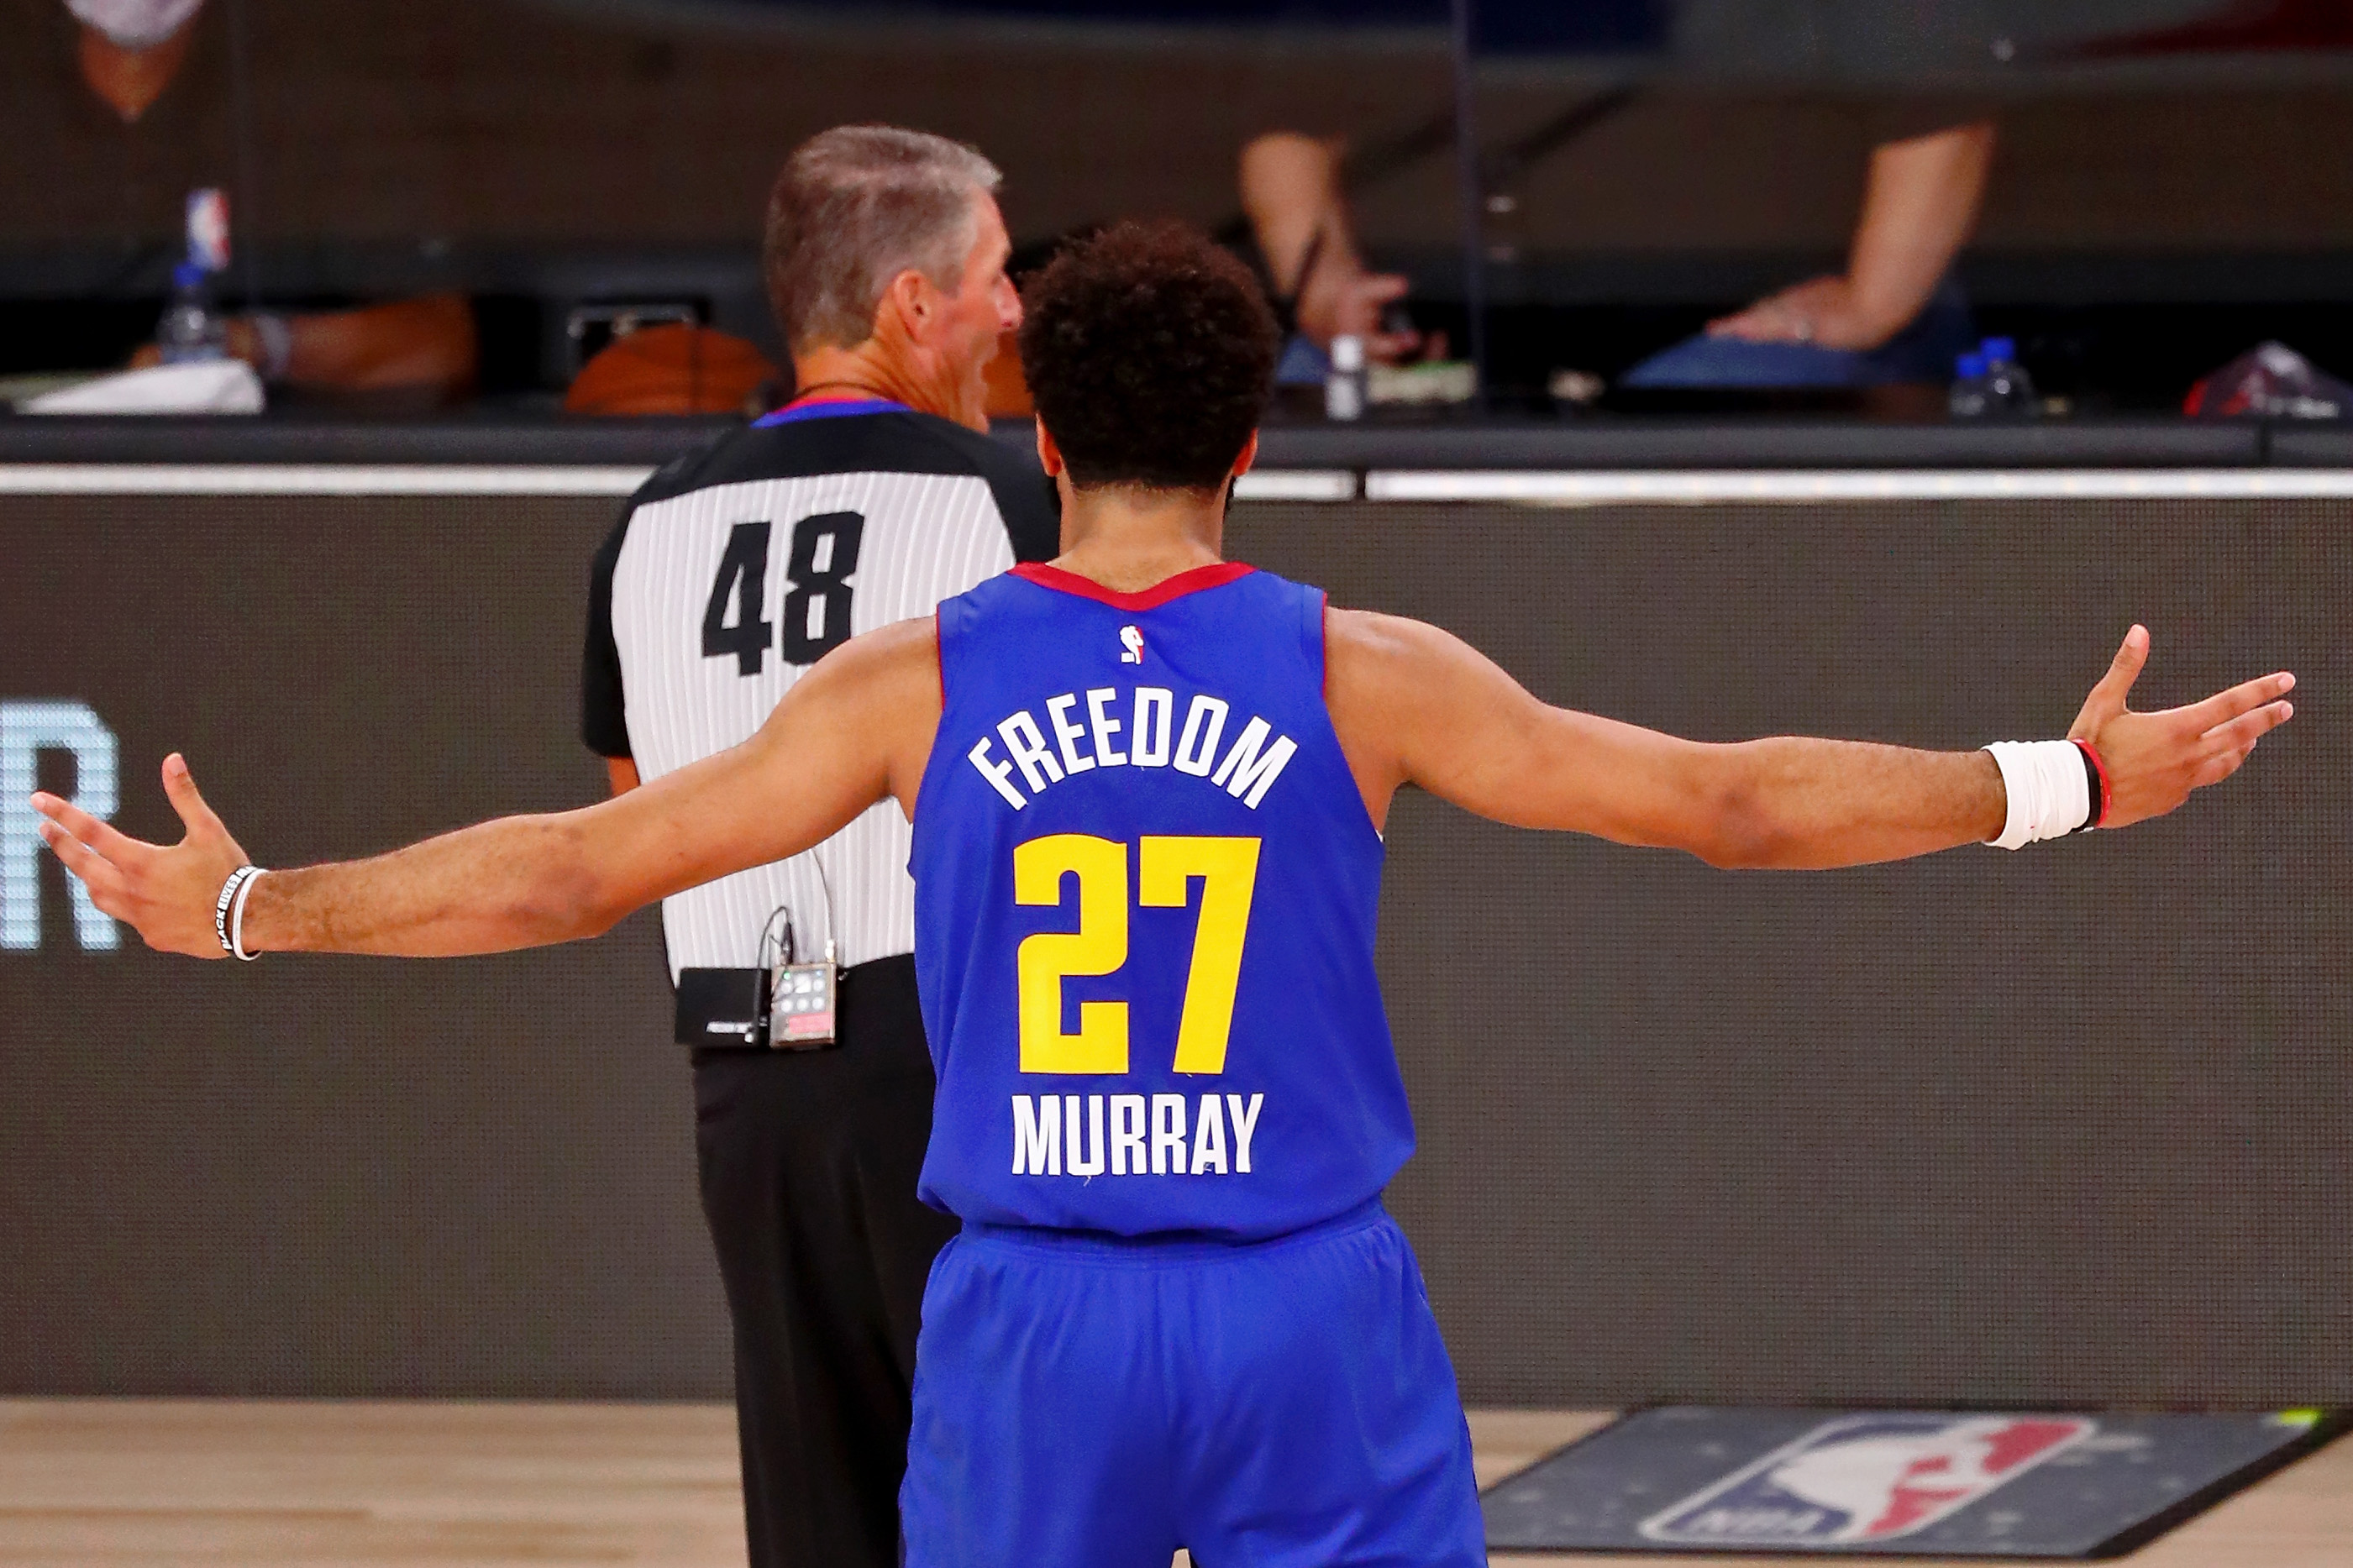 Denver Nuggets guard Jamal Murray (27) reacts after being called for a technical foul against the Los Angeles Lakers during the second quarter in game one of the Western Conference Finals of the 2020 NBA Playoffs at AdventHealth Arena.